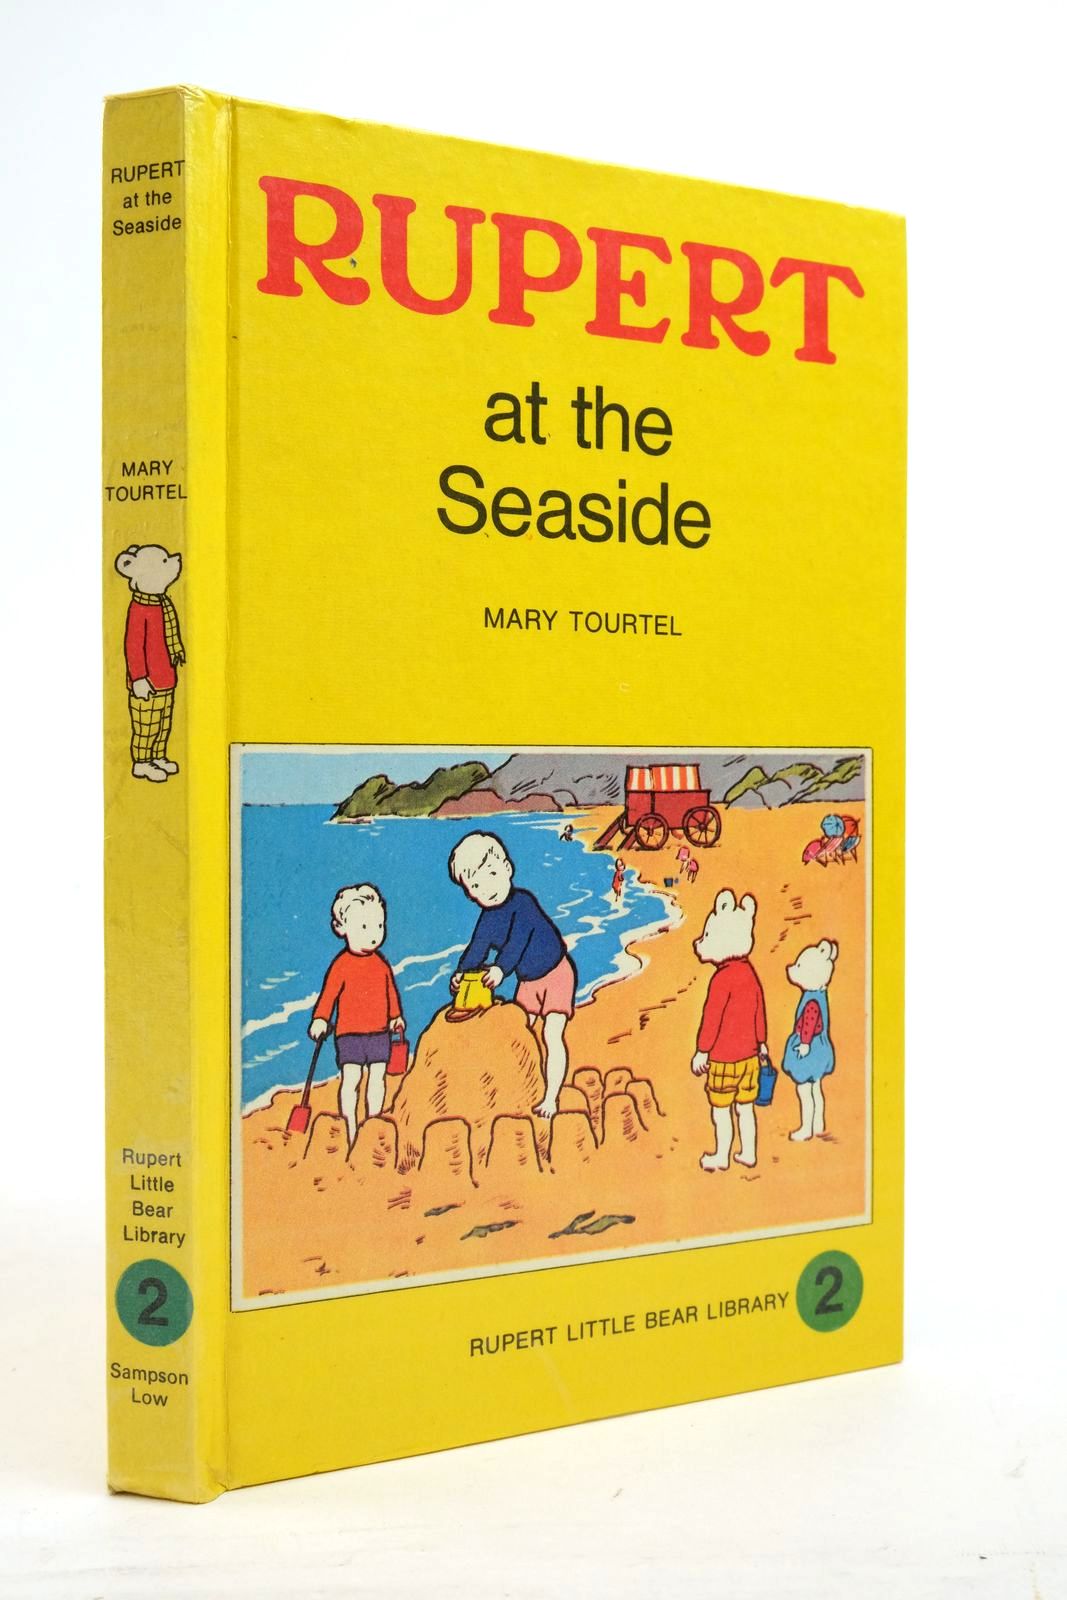 Photo of RUPERT AT THE SEASIDE - RUPERT LITTLE BEAR LIBRARY No. 2 (WOOLWORTH) written by Tourtel, Mary illustrated by Tourtel, Mary published by Sampson Low, Marston & Co. Ltd. (STOCK CODE: 2136969)  for sale by Stella & Rose's Books